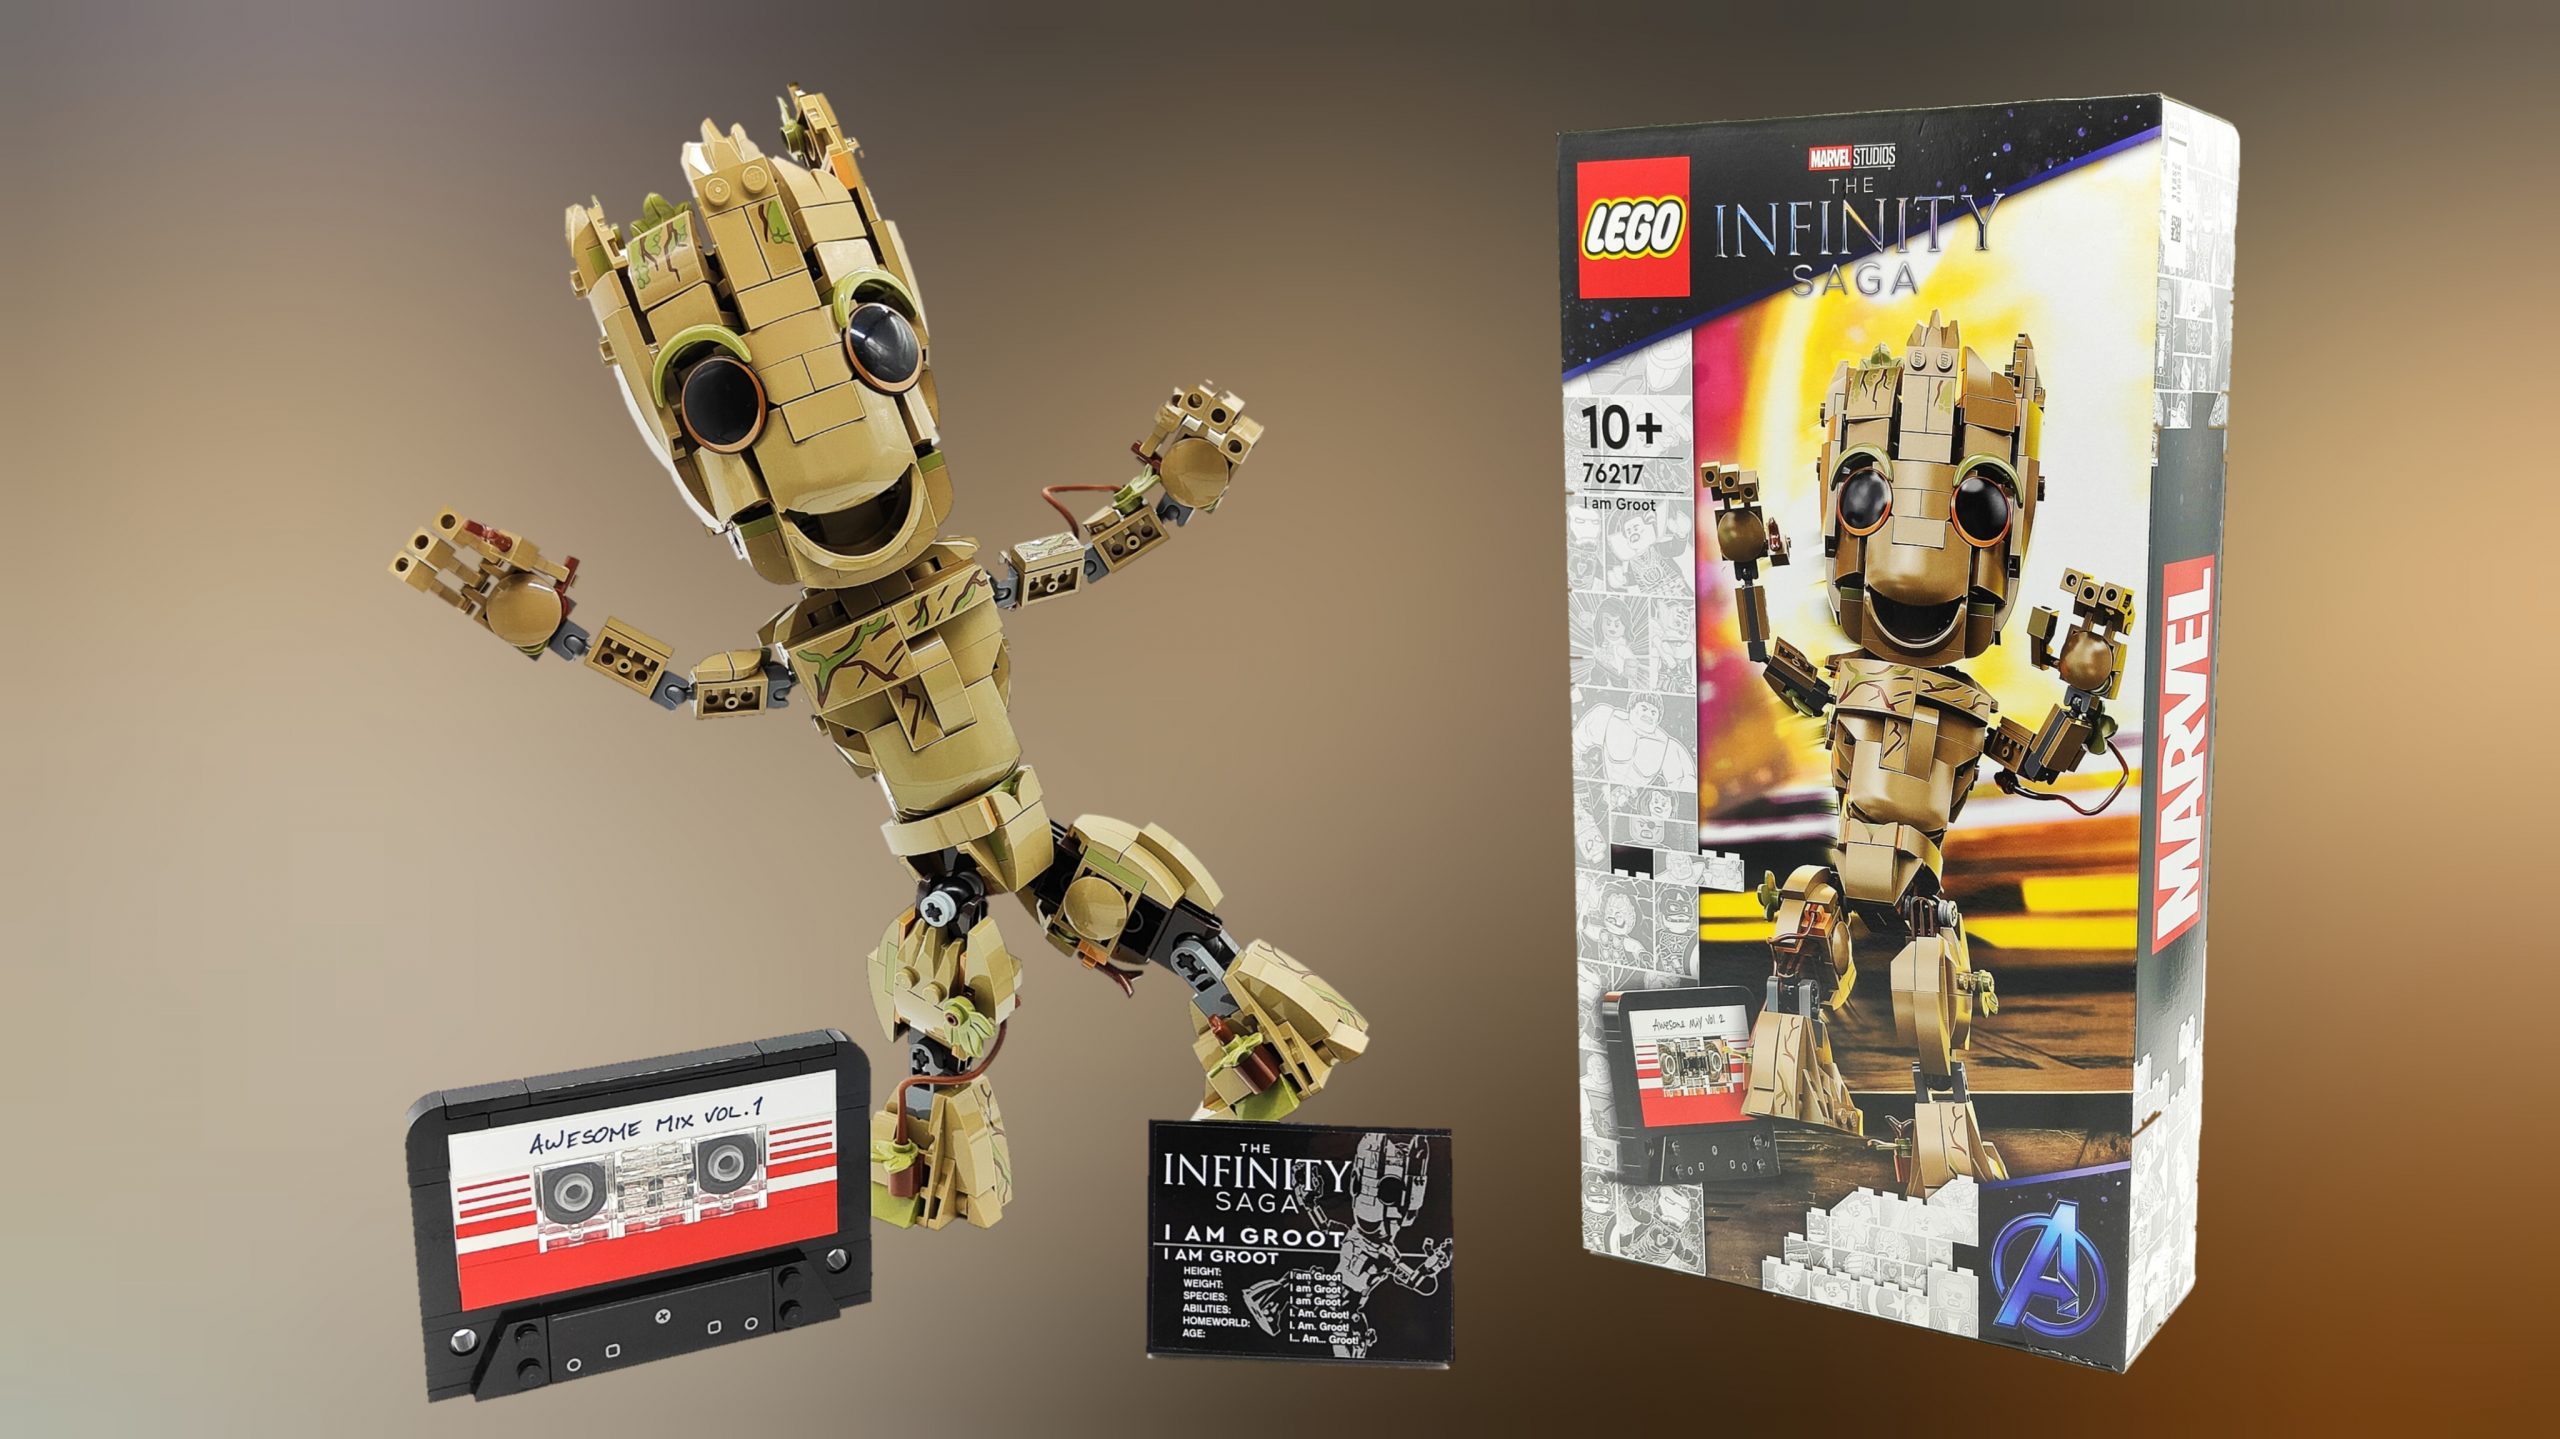 LEGO® Marvel I Am Groot 76217 Build-and-Play Model, Ages 10+